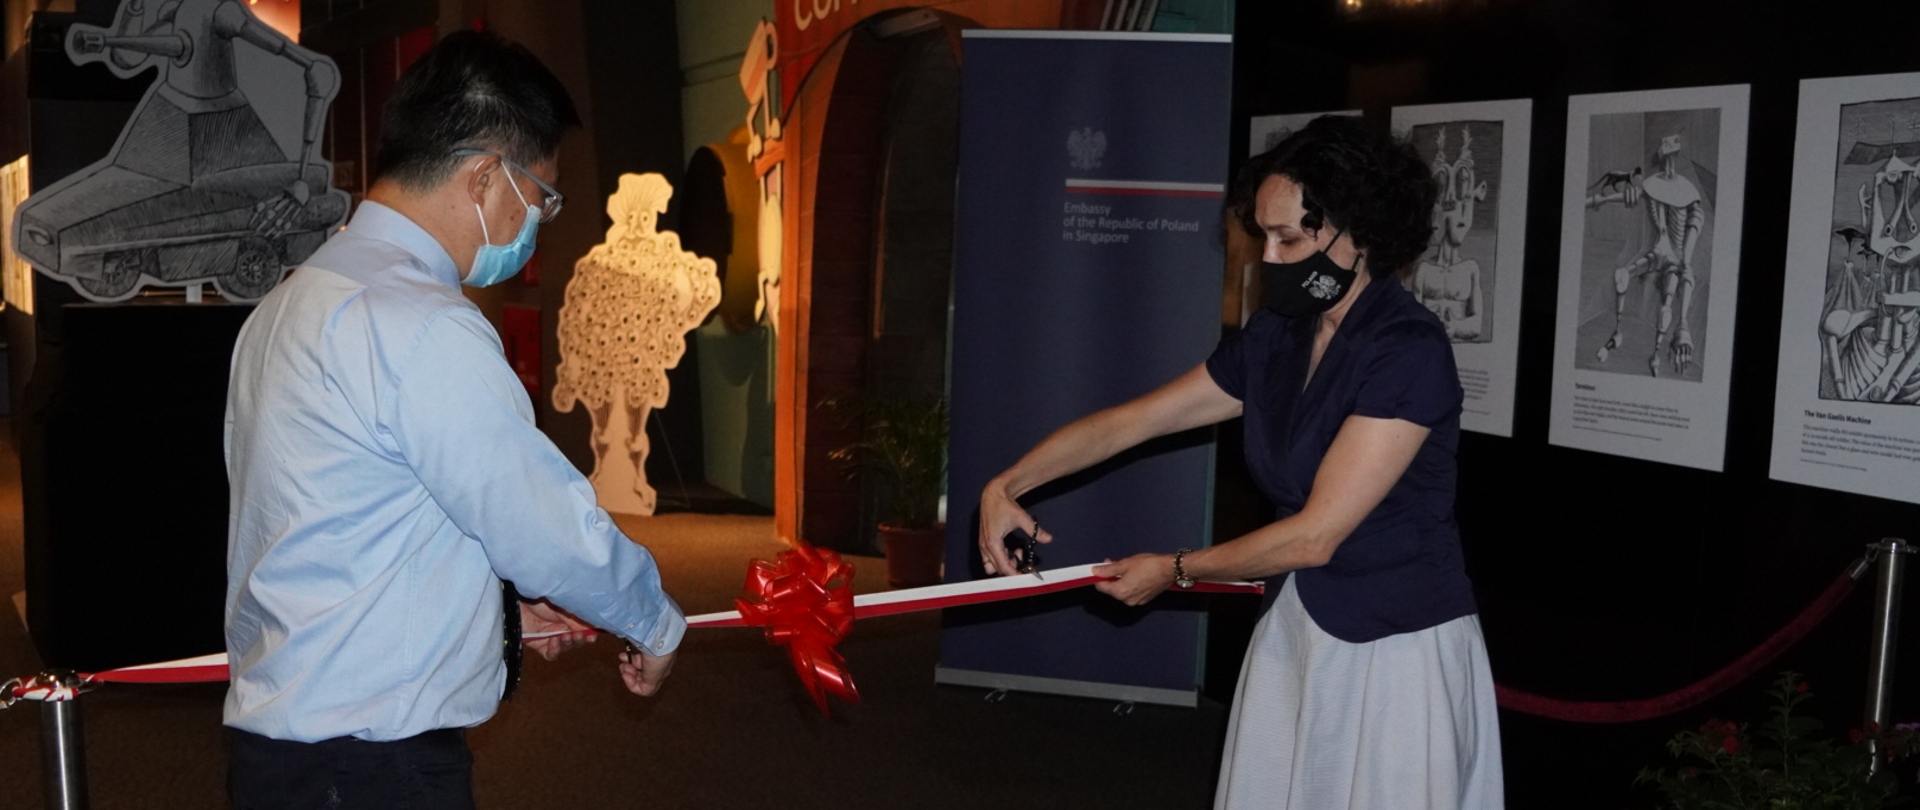 The opening of “Lem’s Bestiary Illustrated by Mróz” exhibition at Science Center Singapore. Ribbon-cutting by Ambassador Magdalena Bogdziewicz and CEO of Science Centre Singapore, Professor Lim Tit Meng